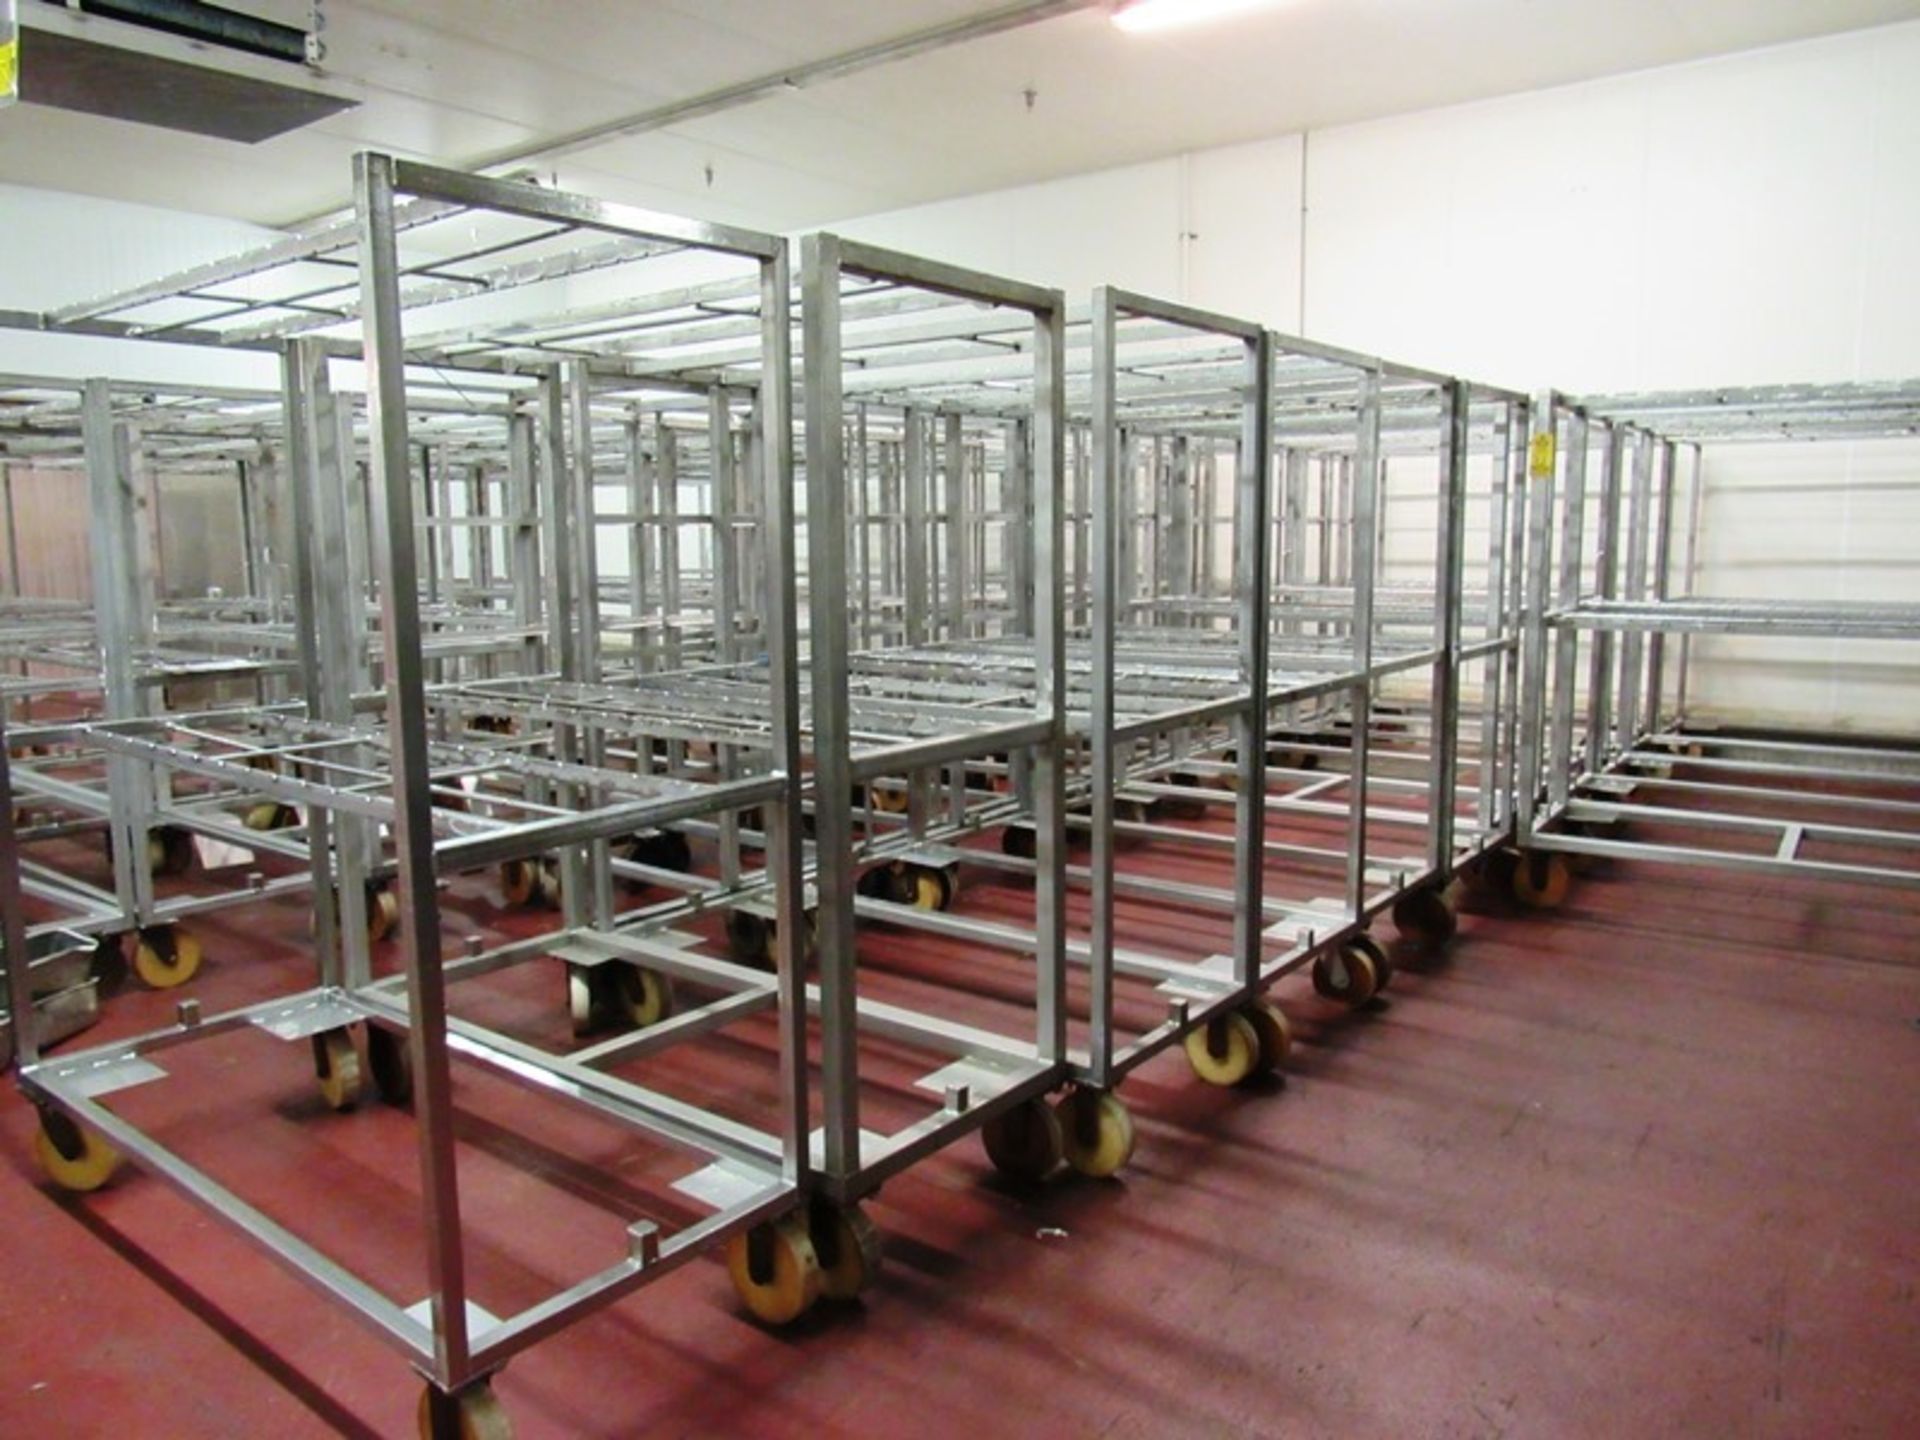 Stainless Steel Belly Racks, 30" W X 72" L X 80" T on 8" casters, holds 60 bellies ($100.00 Required